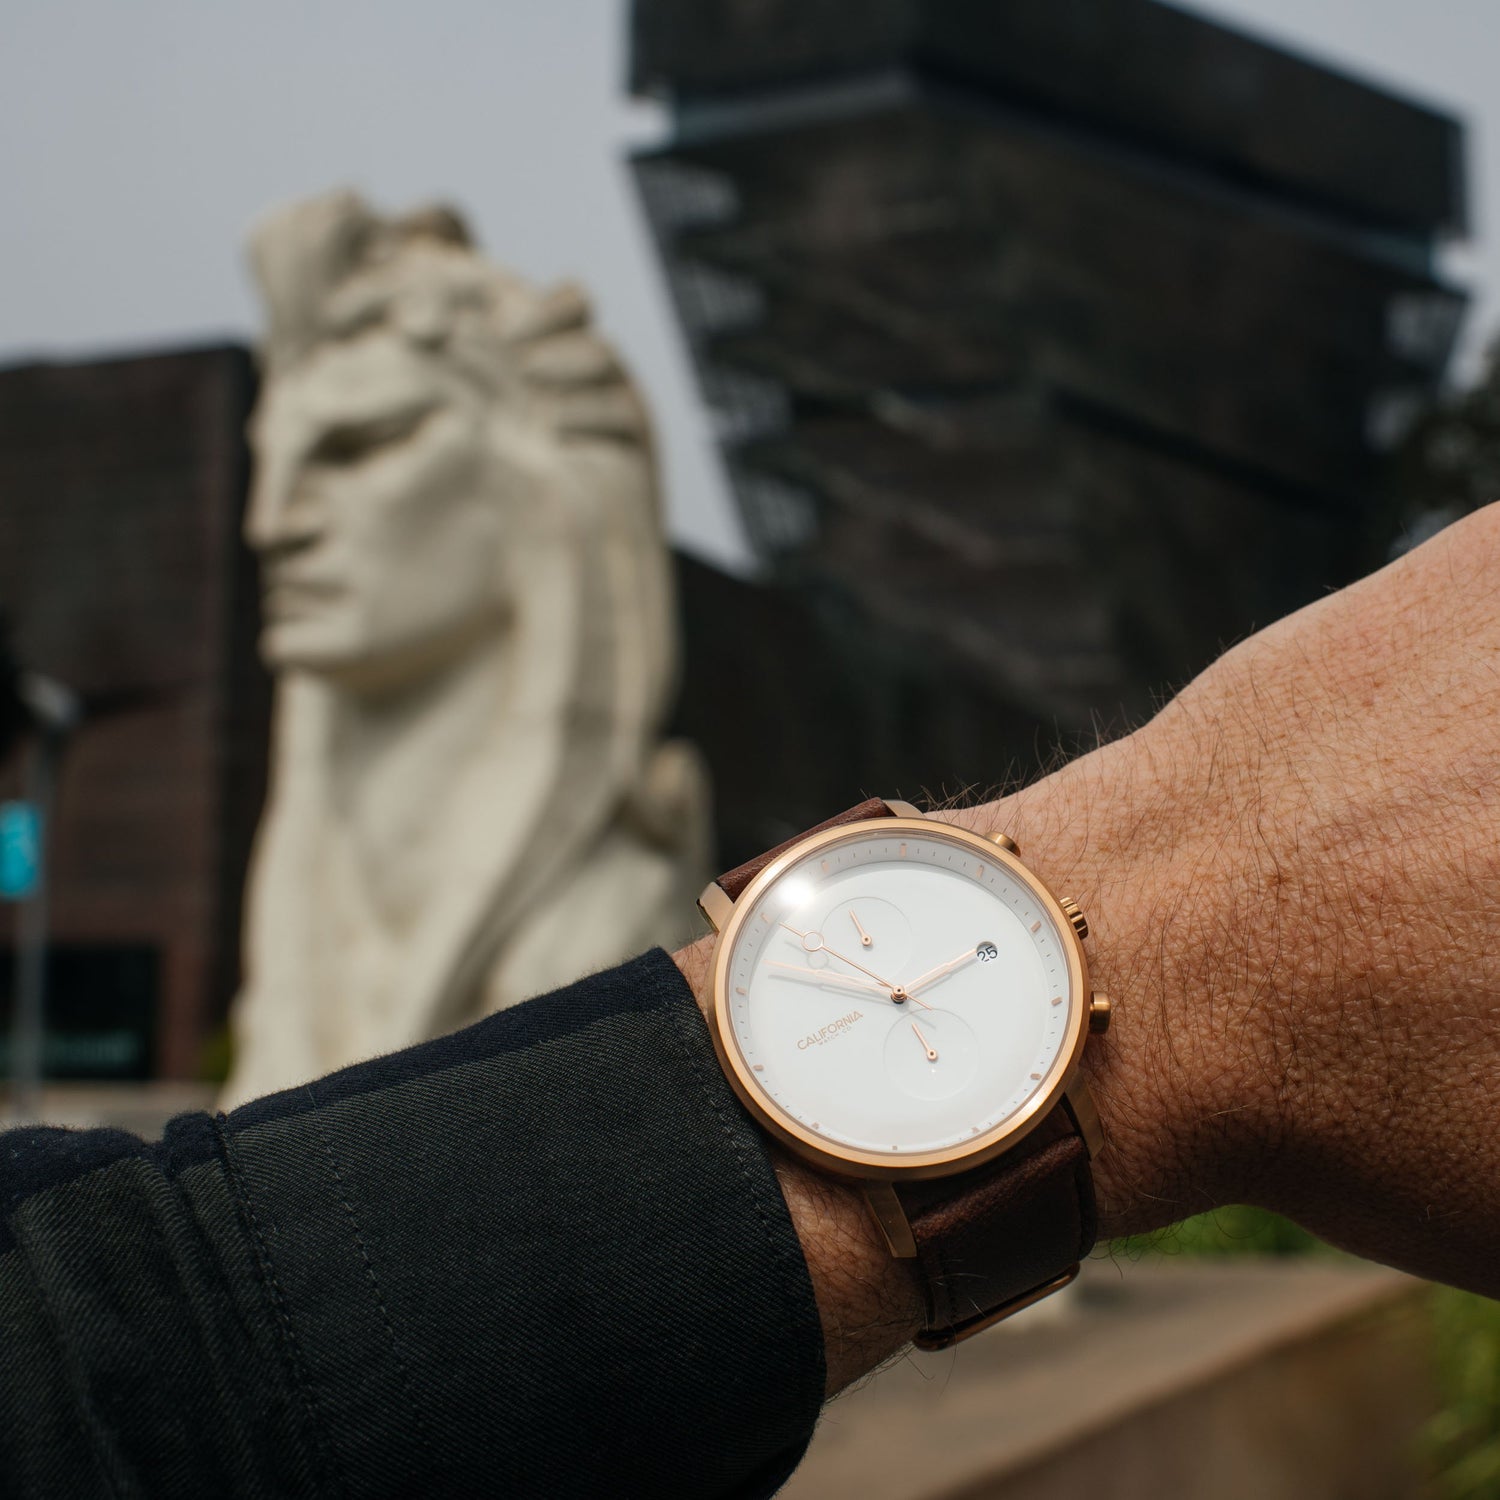 California Watch Co. Golden Gate Chrono Leather Rose Gold White